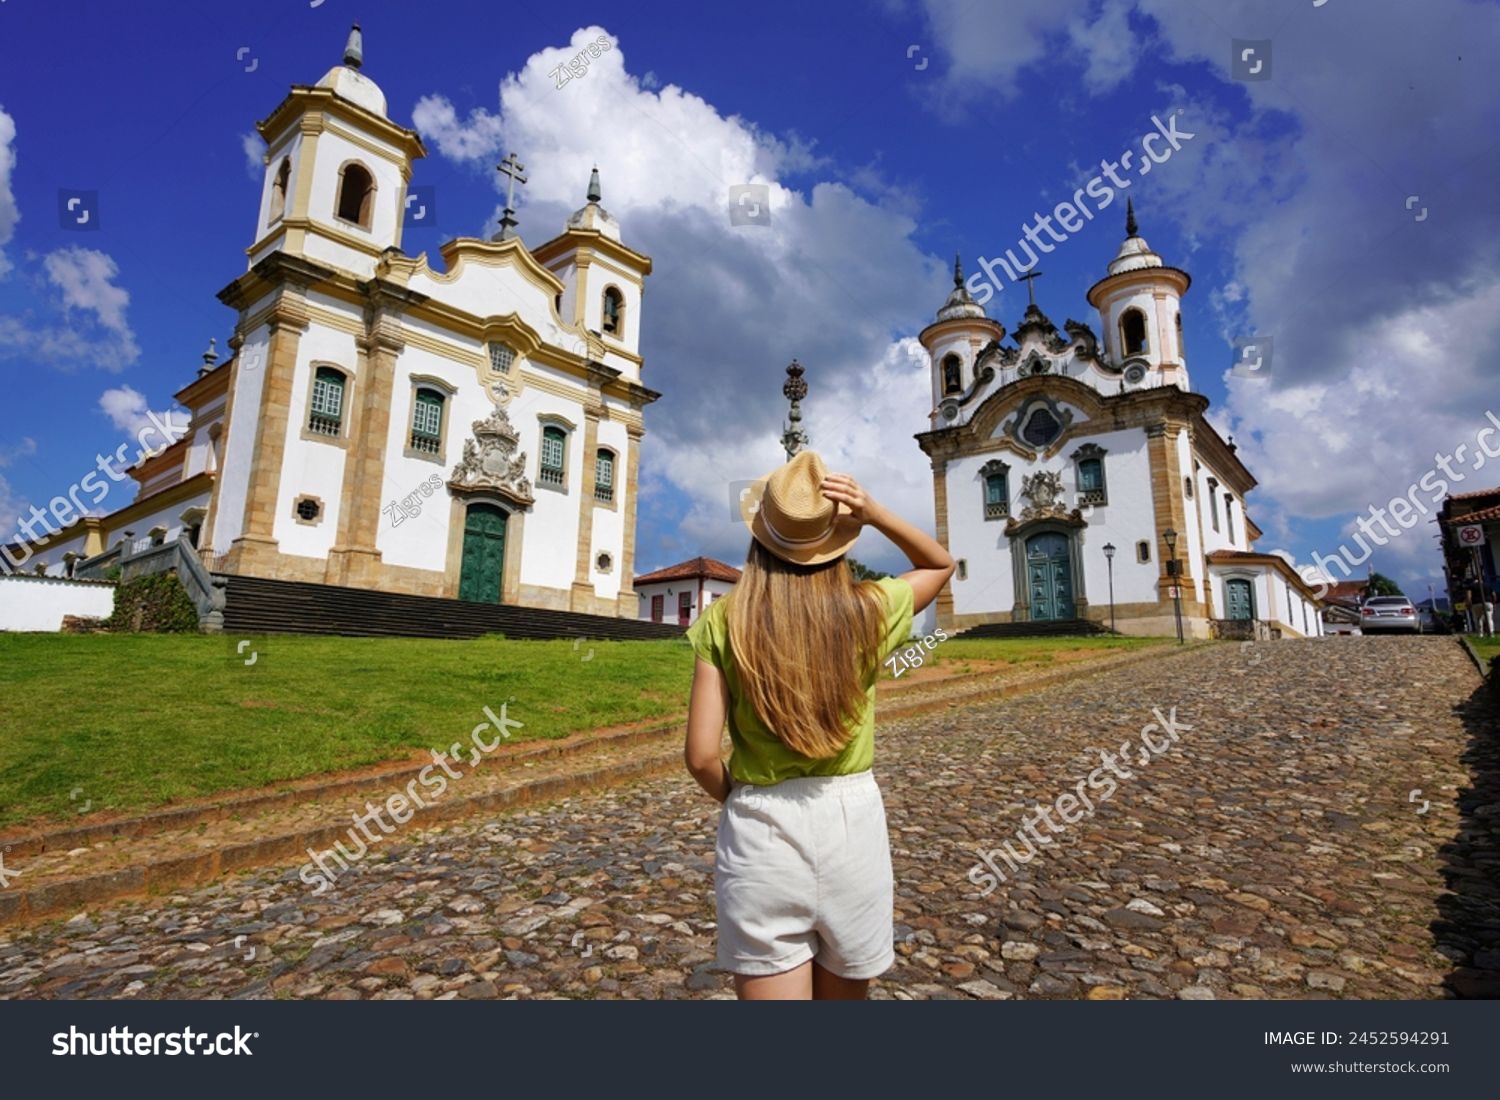 Holidays in Minas Gerais, Brazil. Back view of traveler girl visiting historical town of Mariana with baroque colonial architecture. Mariana is the oldest city in the state of Minas Gerais, Brazil. #2452594291